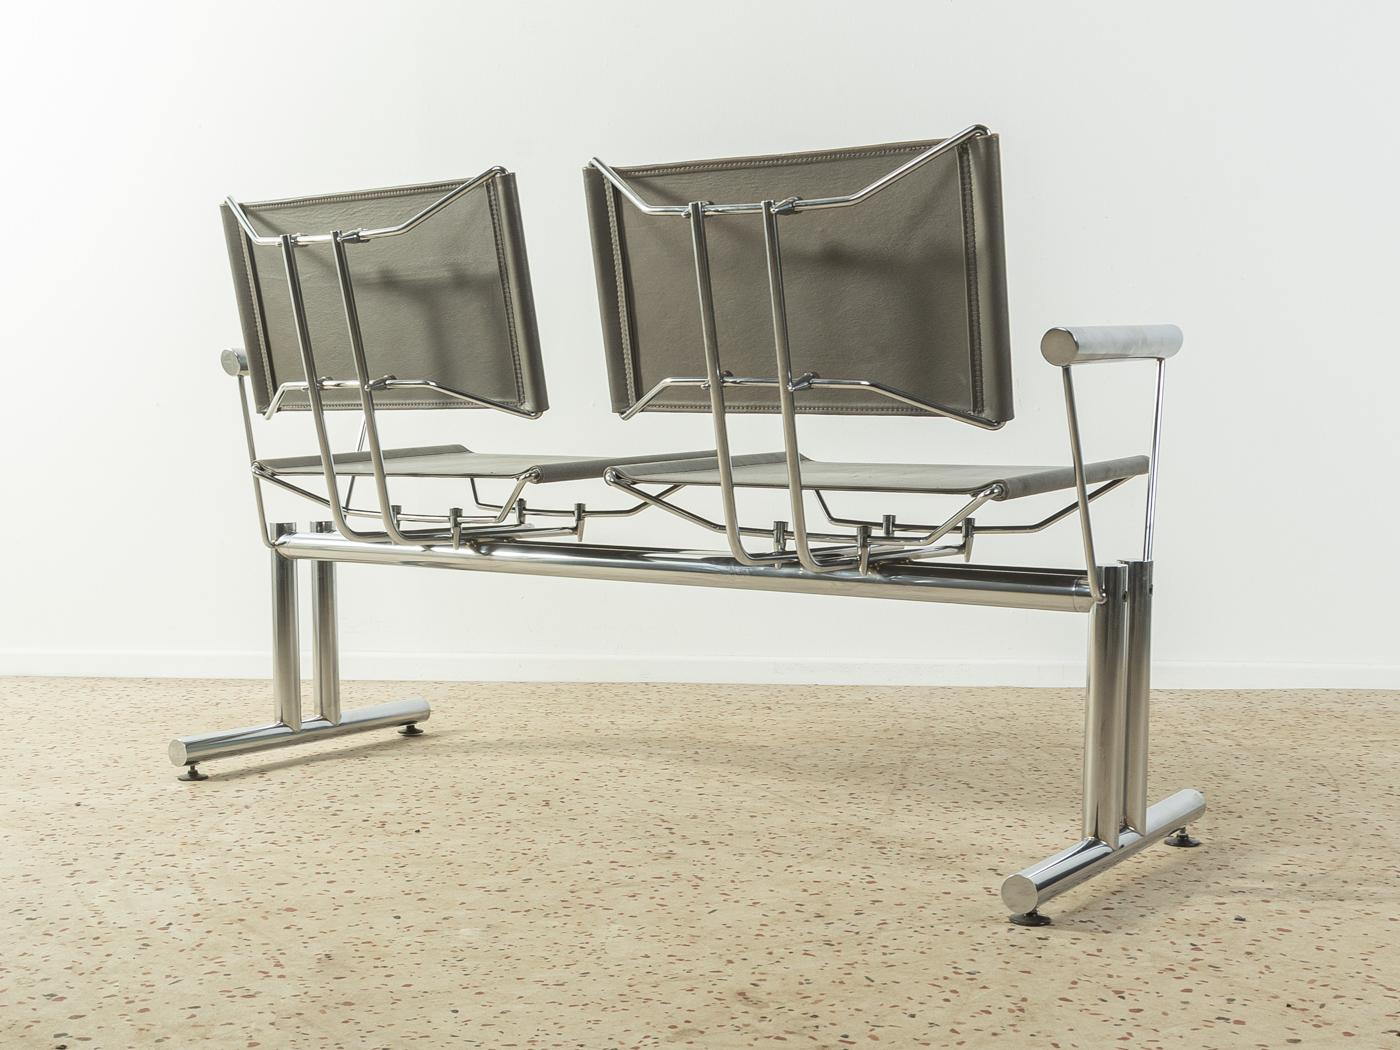 Extraordinary bench from the series 8600 by Hans-Ullrich Bitsch for Kusch & Co from the 1980s. High-quality chromed metal frame with thick leather seat and backrest in grey.

Quality features:
 very good workmanship
 high-quality materials
